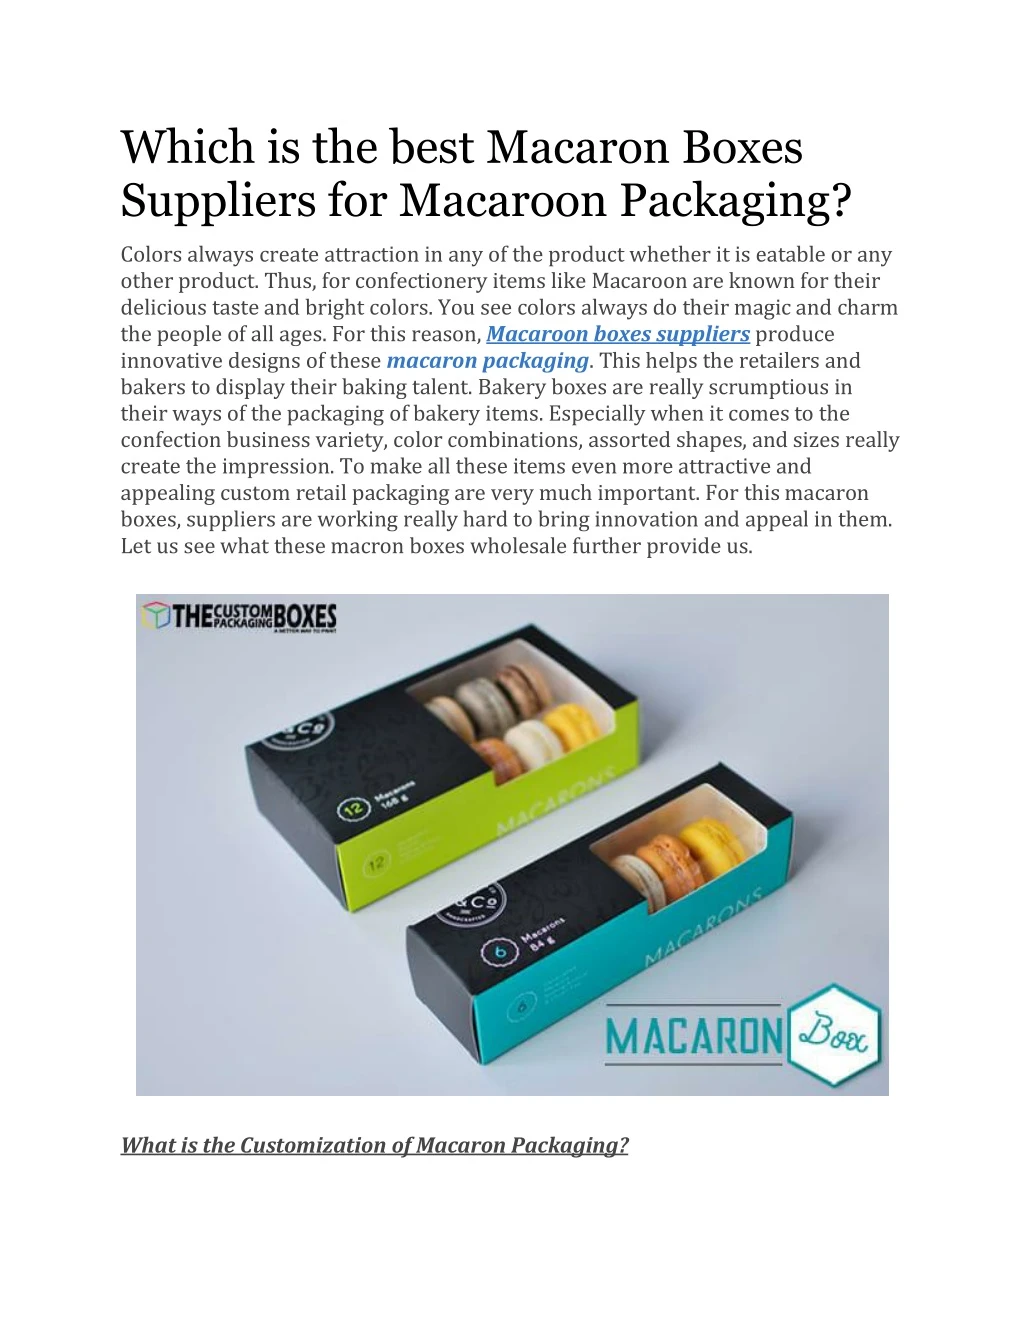 which is the best macaron boxes suppliers